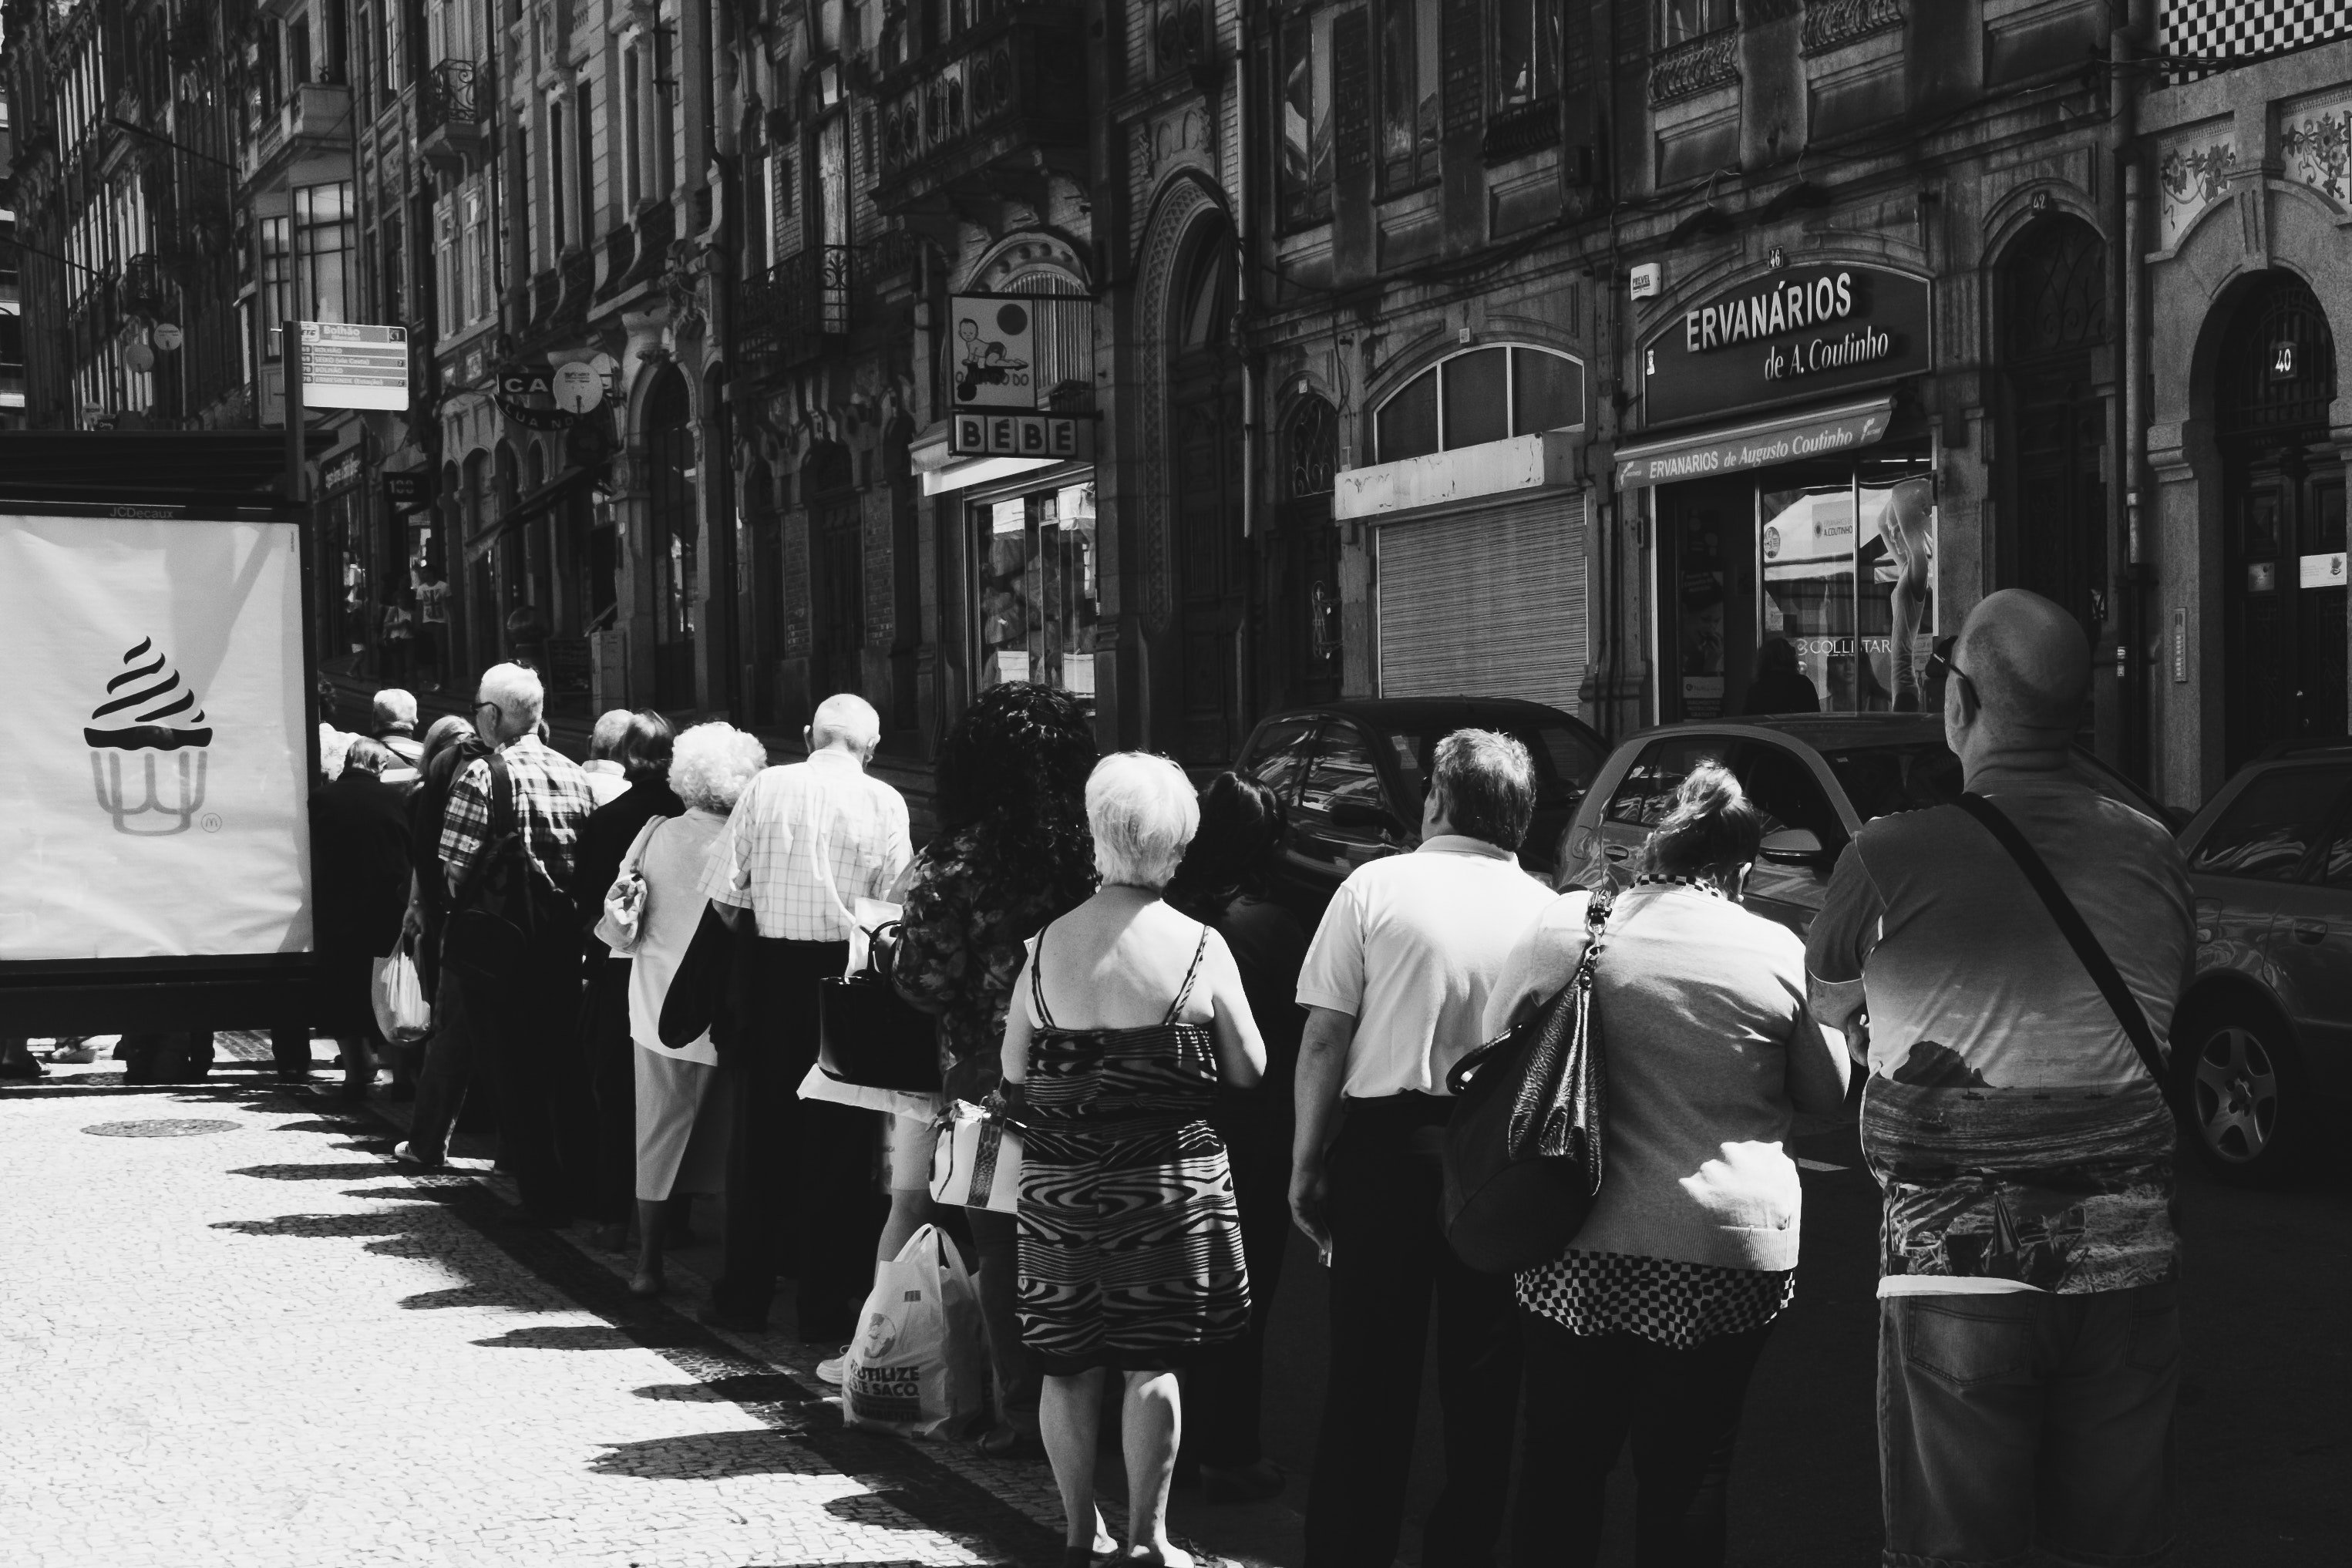 A group of people on a queue | Photo: Pexels